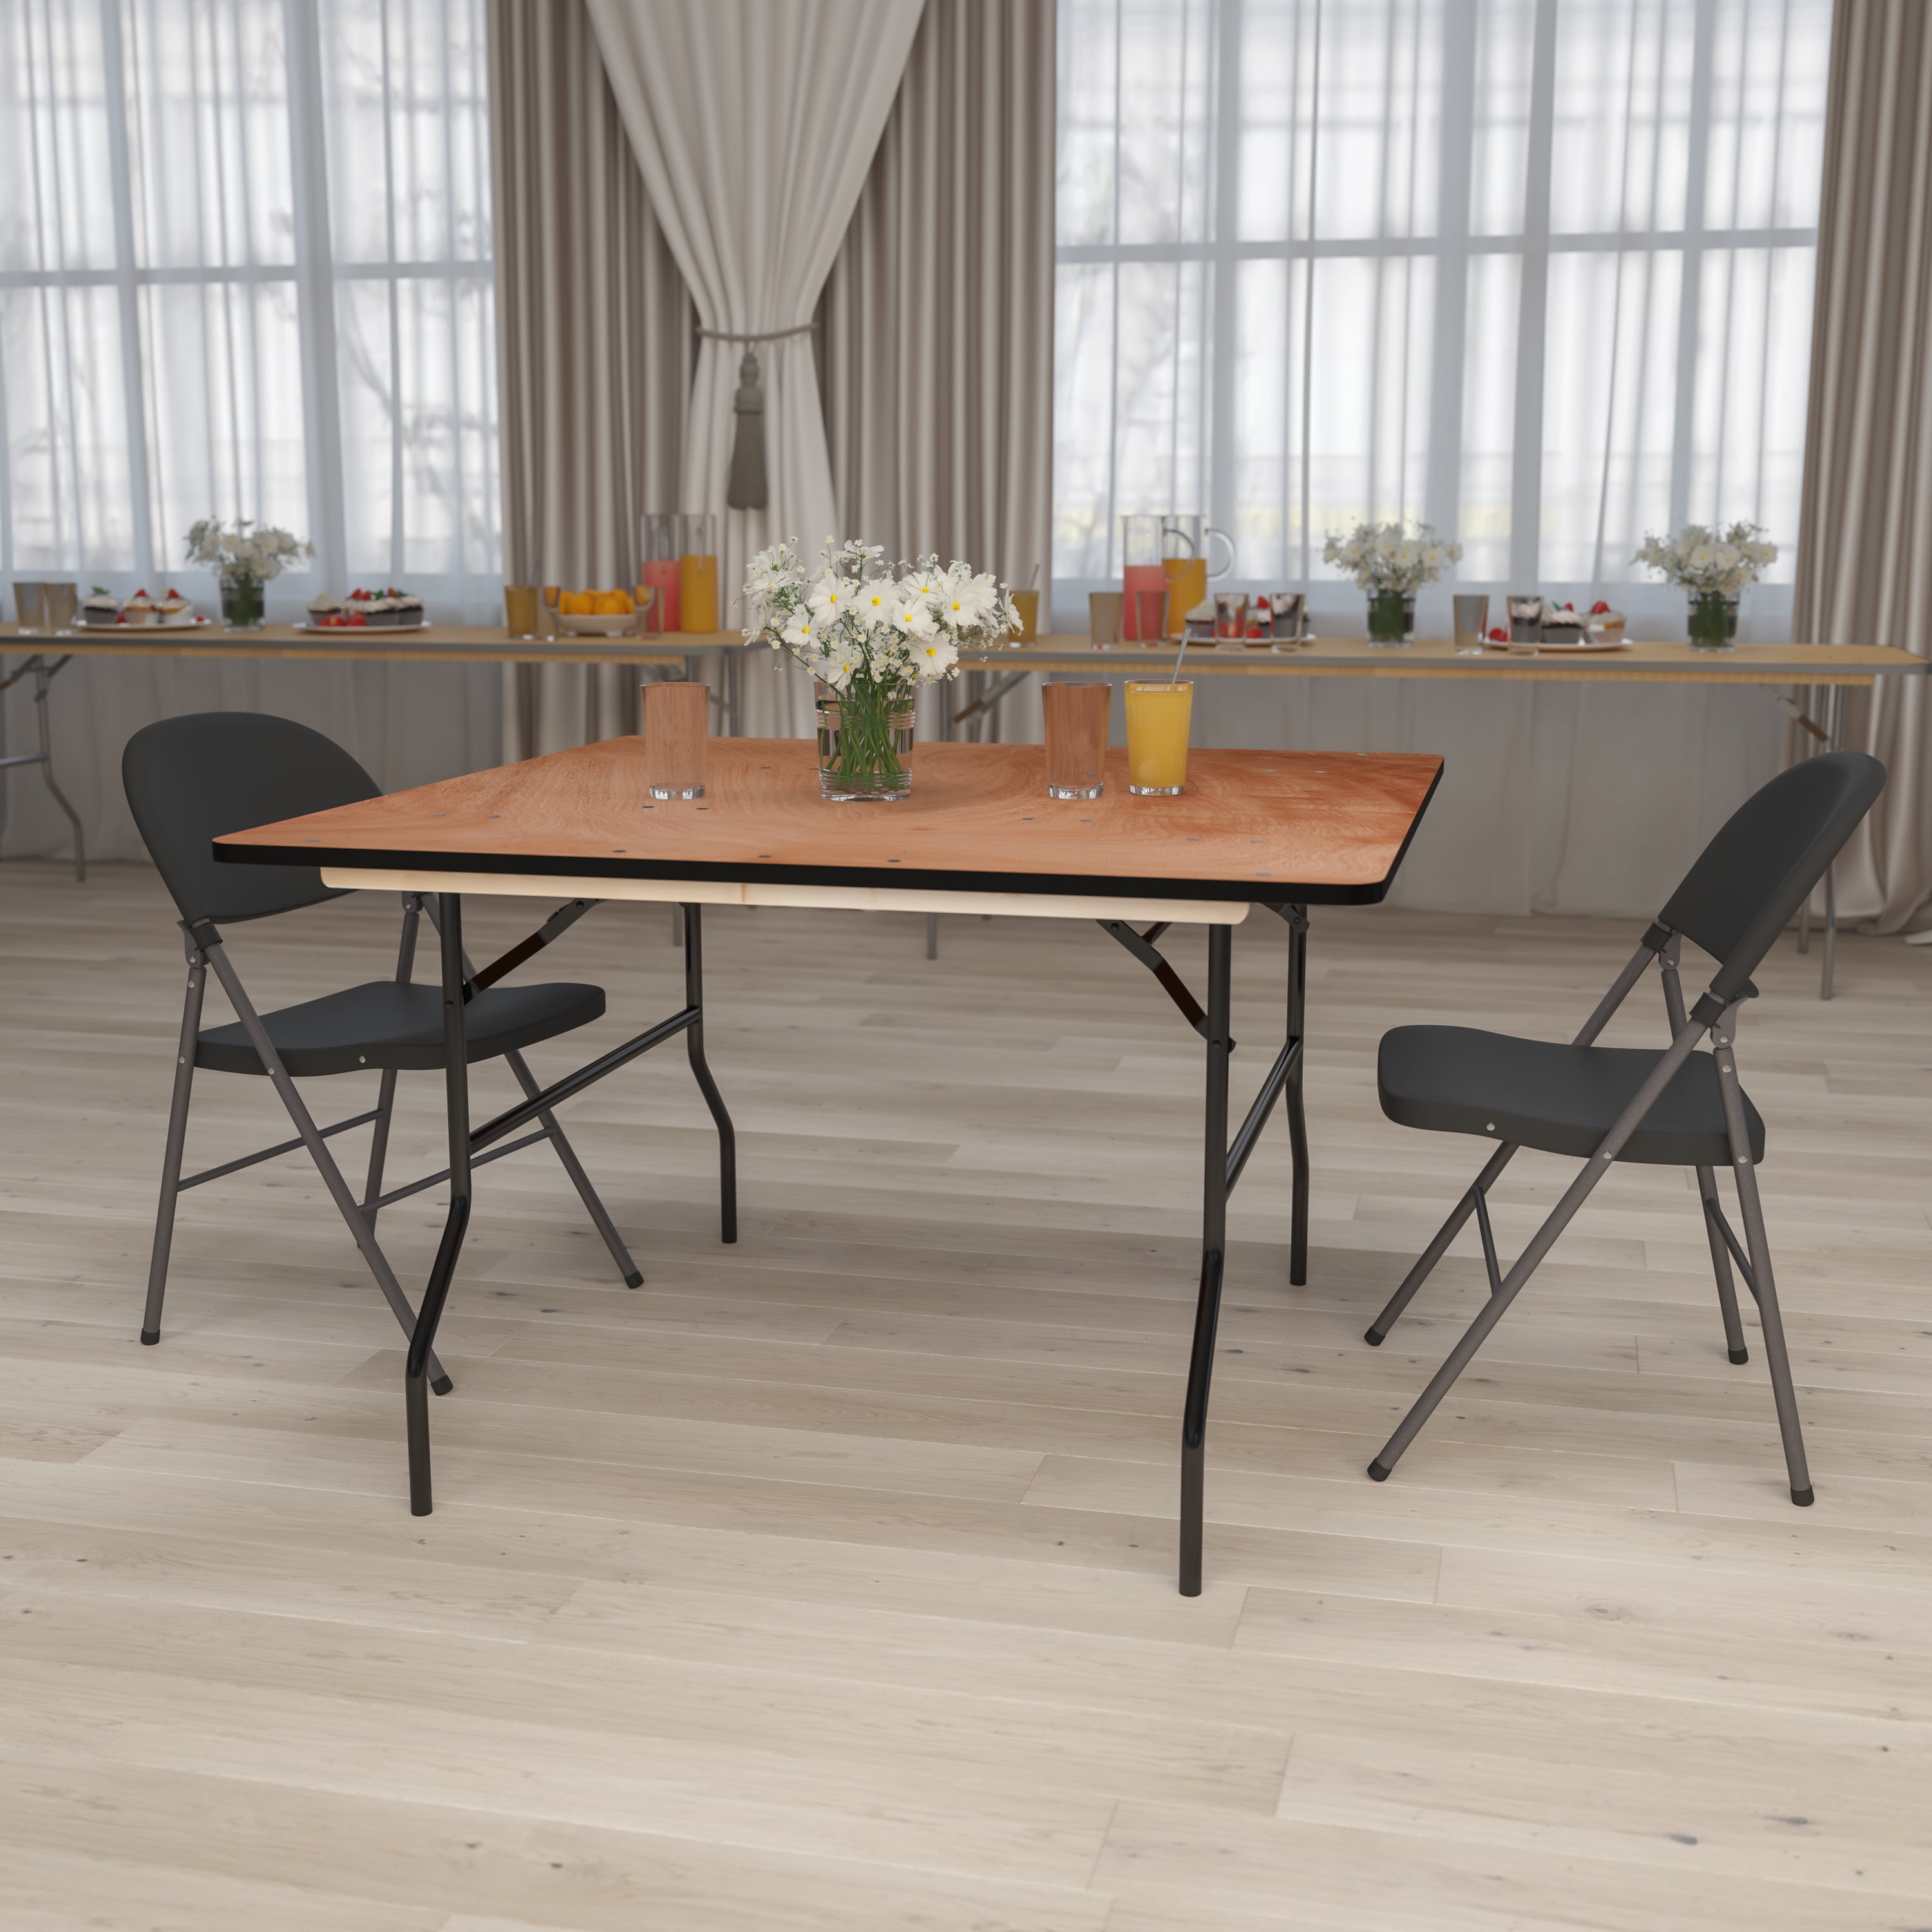 48"  Square Commercial Quality Wood Folding Banquet Dining Table 2 PACK 